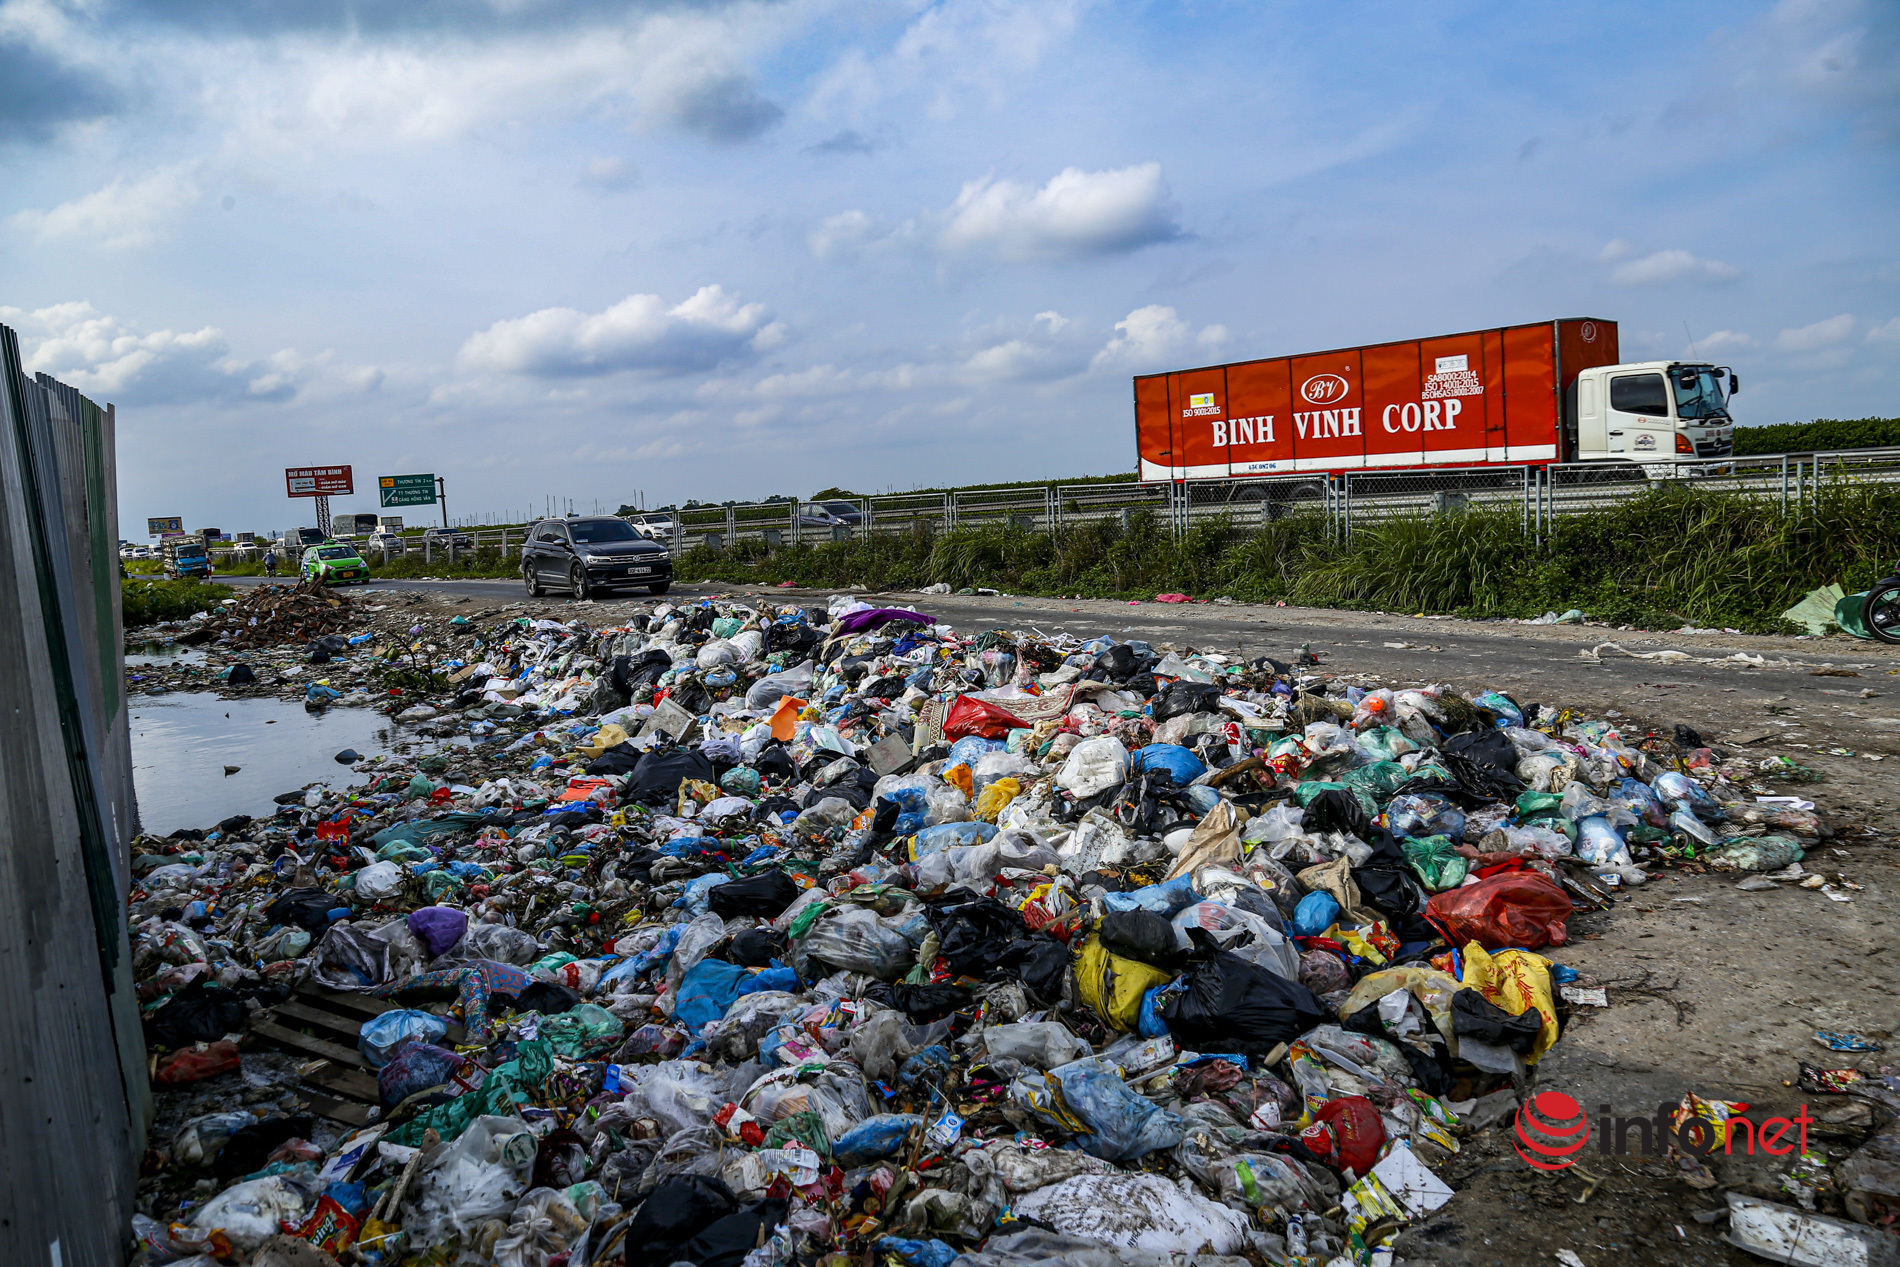 Garbage surrounds Phap Van - Cau Gie expressway, people 500m away can't stand the stench.